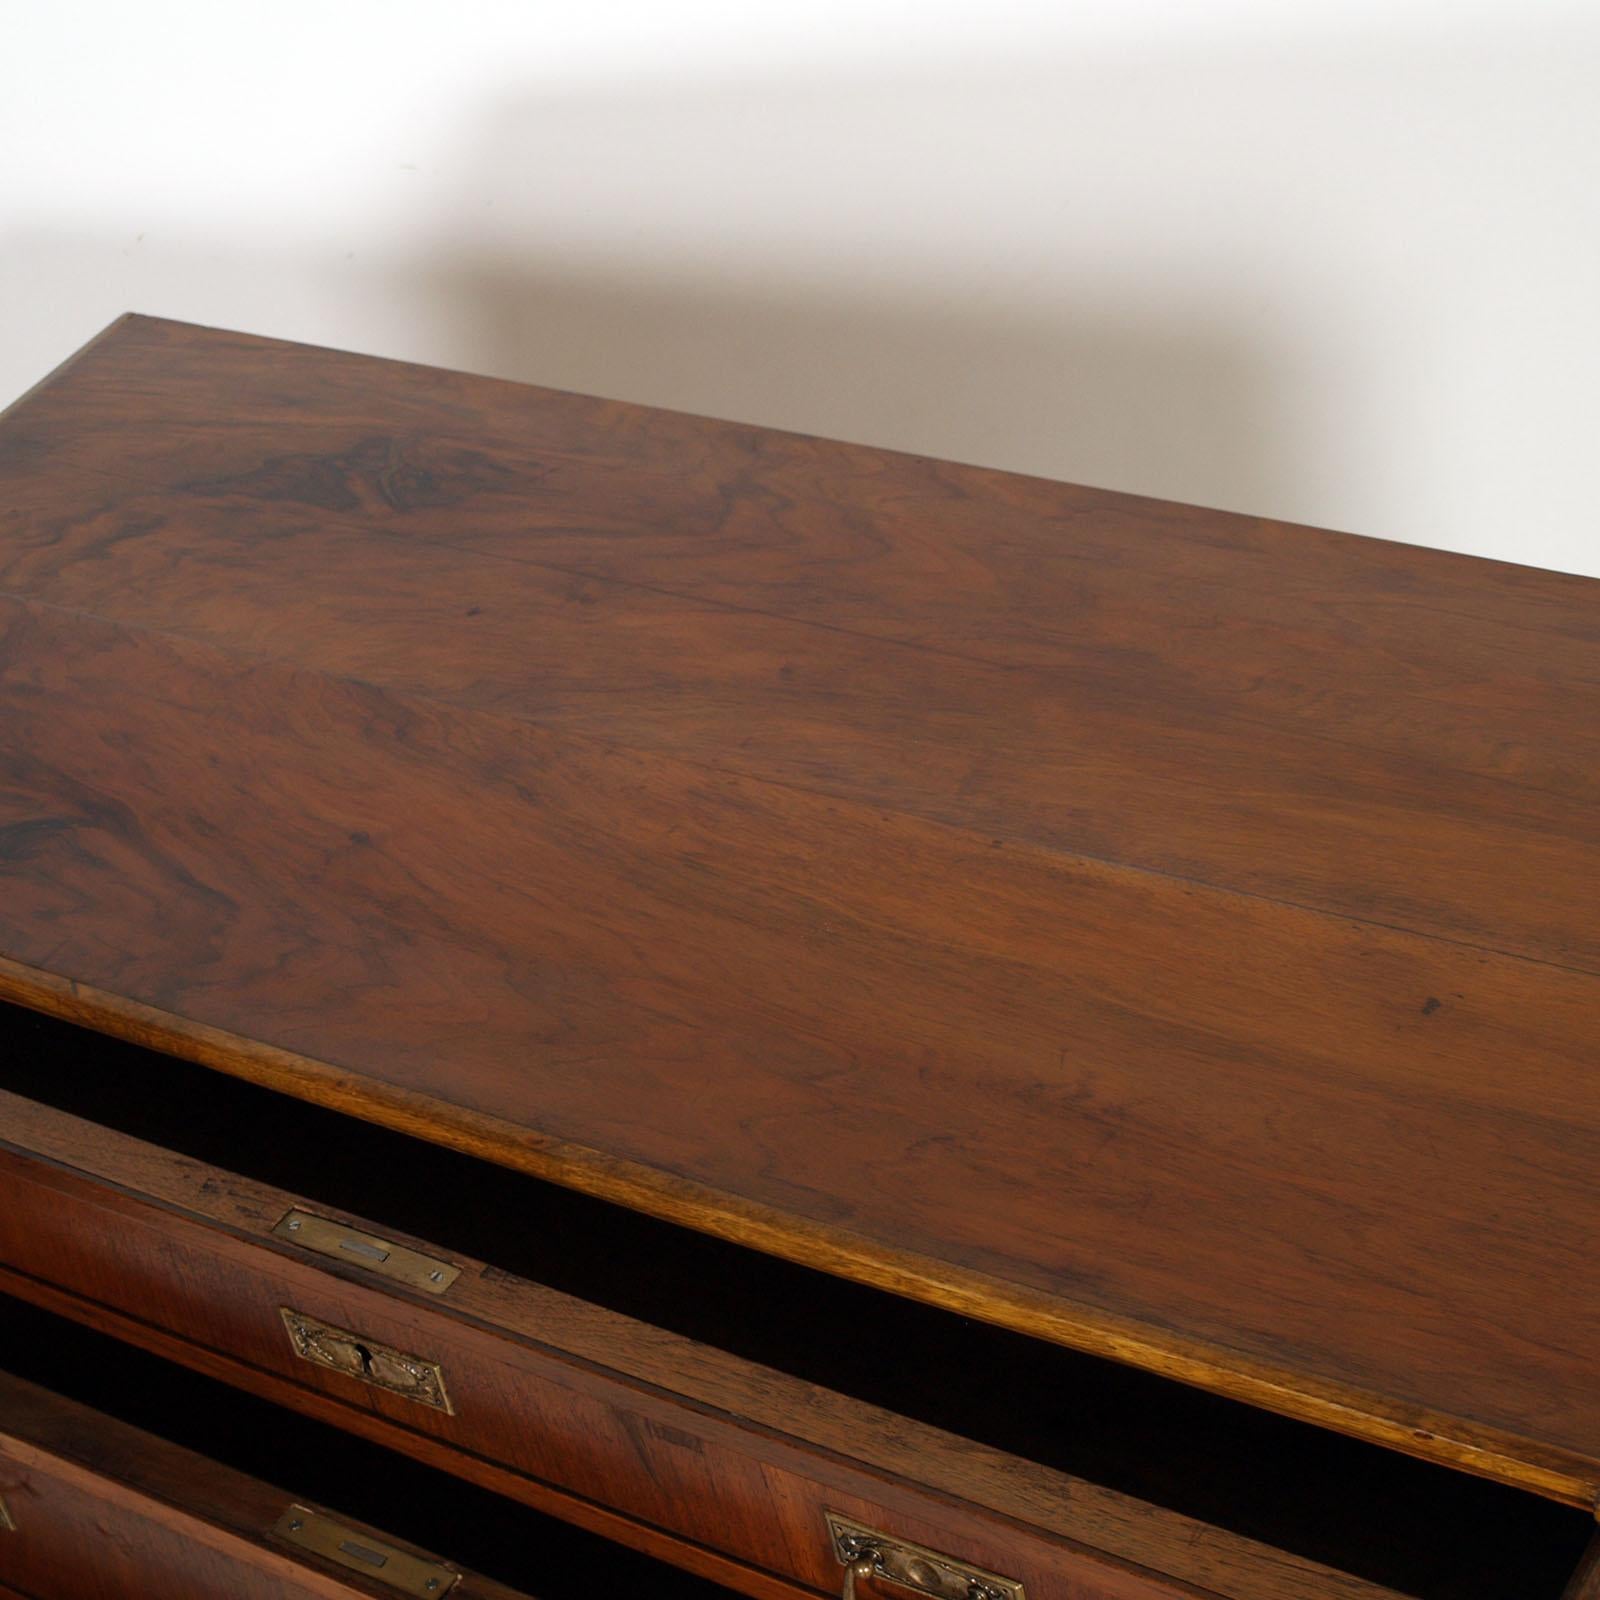 Last 19th Century Commode Chest of Drawers, Walnut, Restored and Polished to Wax 1